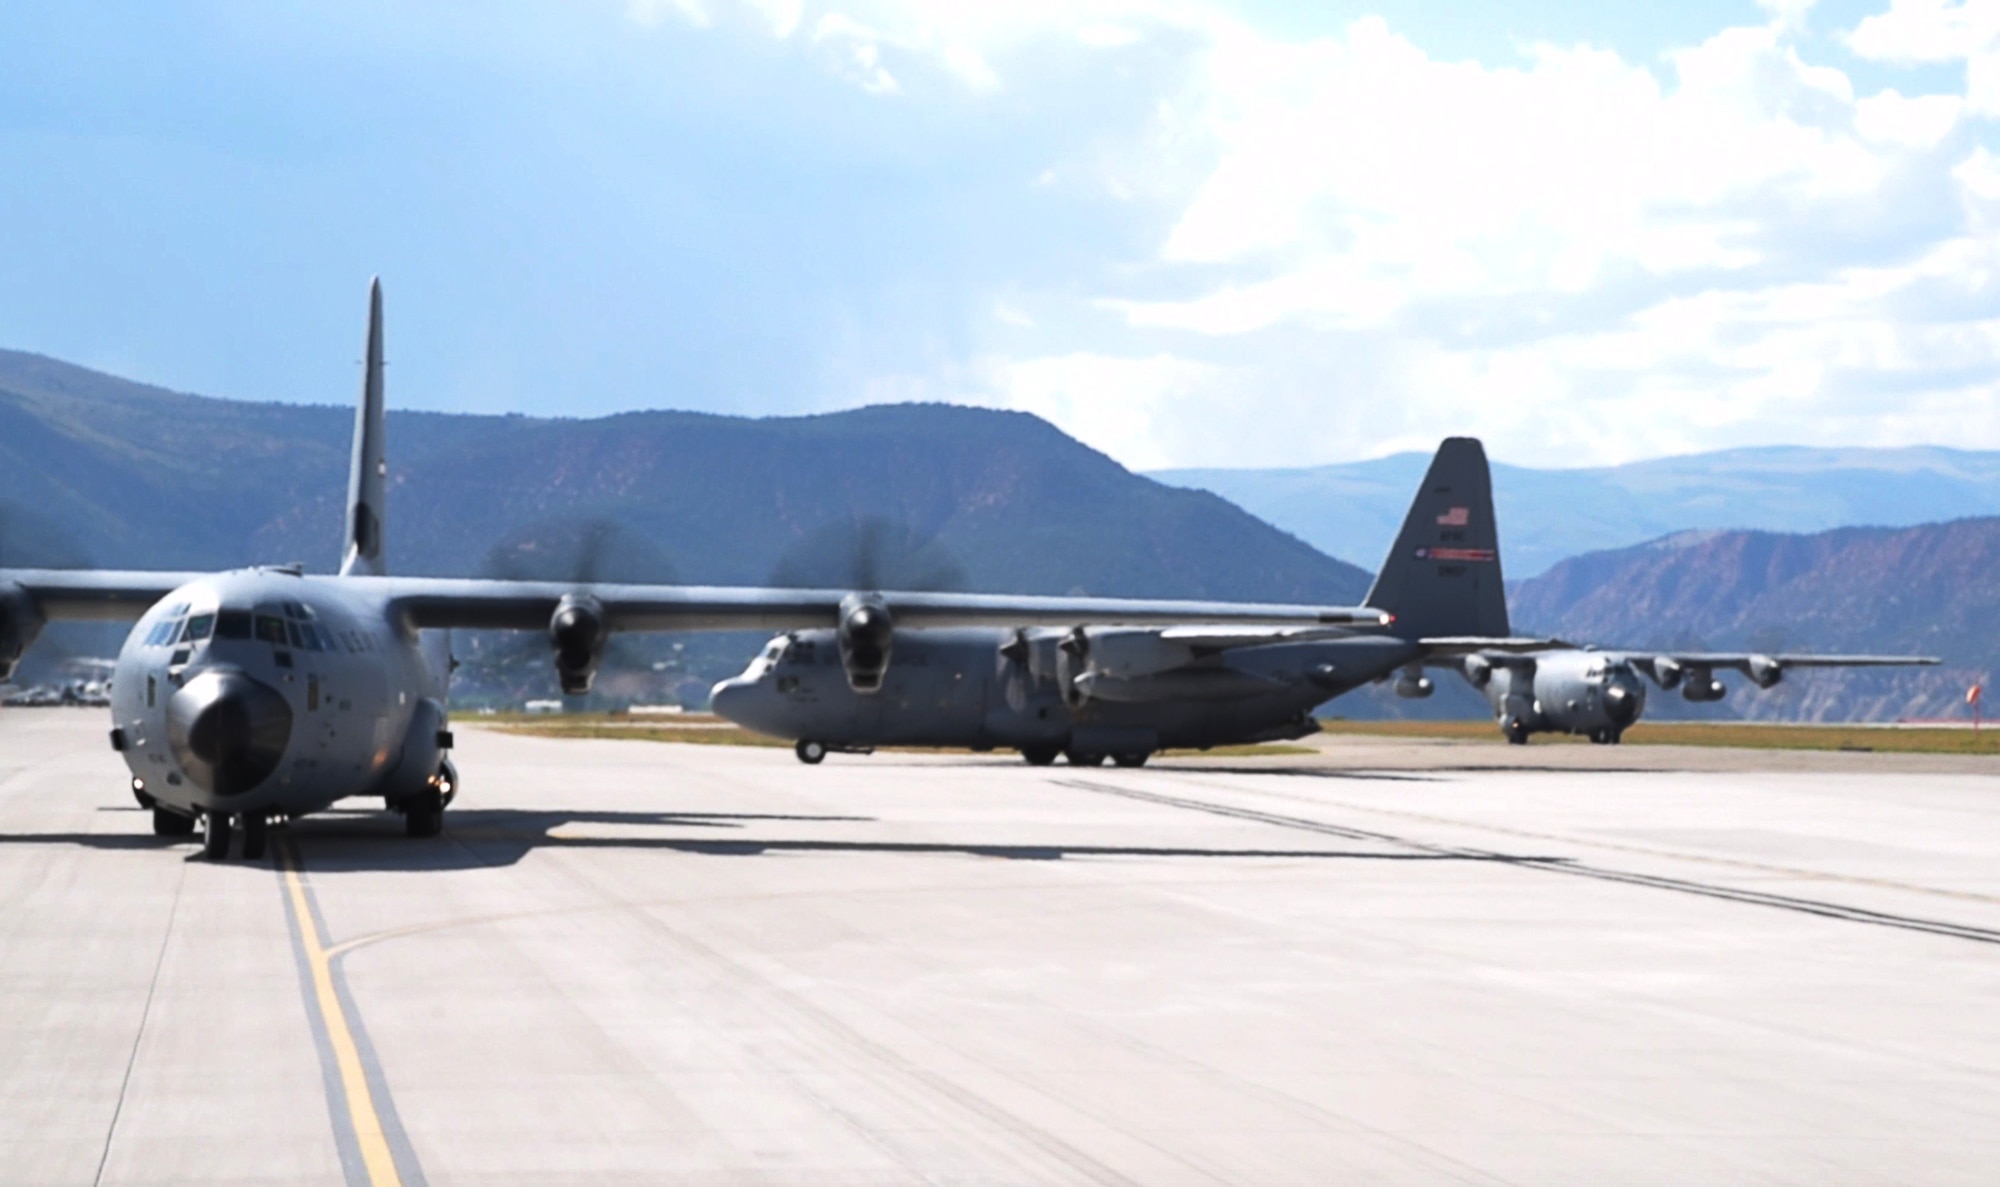 Members of the 815th Airlift Squadron out of Keesler Air Force Base, Miss. and the 757th Airlift Squadron out of Youngstown Air Reserve Station, Ohio taxi after landing in formation at the Vail Valley Jet Center, Gypsum, Colorado after conducting an airdrop in Taylor Park, Colorado during the 22nd Air Force’s flagship exercise Rally in the Rockies Sept. 13-17, 2021. The exercise is designed to develop Airmen for combat operations by challenging them with realistic scenarios that support a full spectrum of operations during military actions, operations or hostile environments. (U.S. Air Force photo by Master Sgt. Jessica Kendziorek)